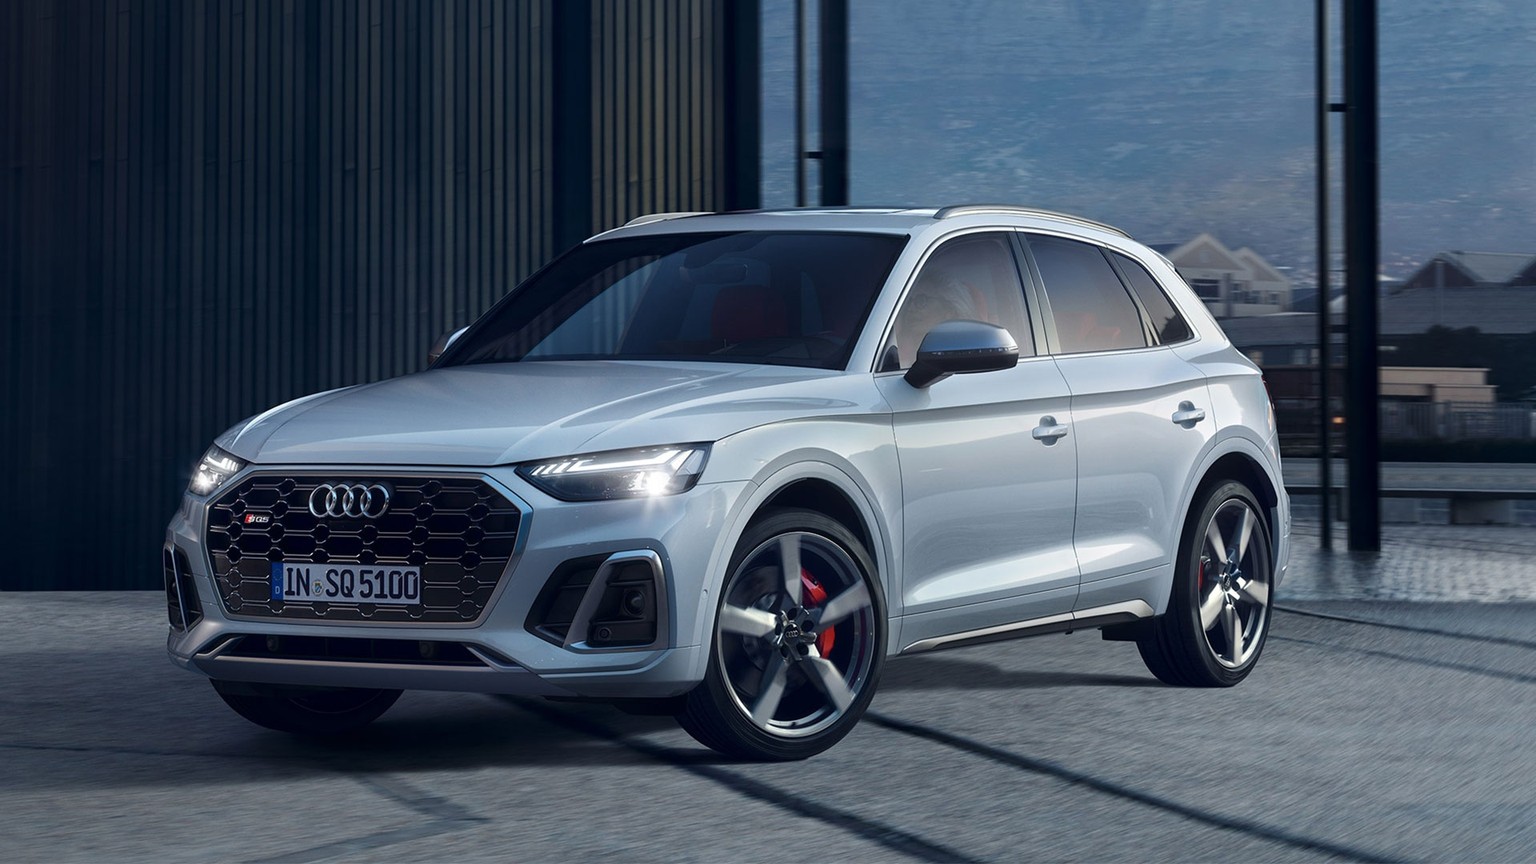 Front-side view of the Audi SQ5